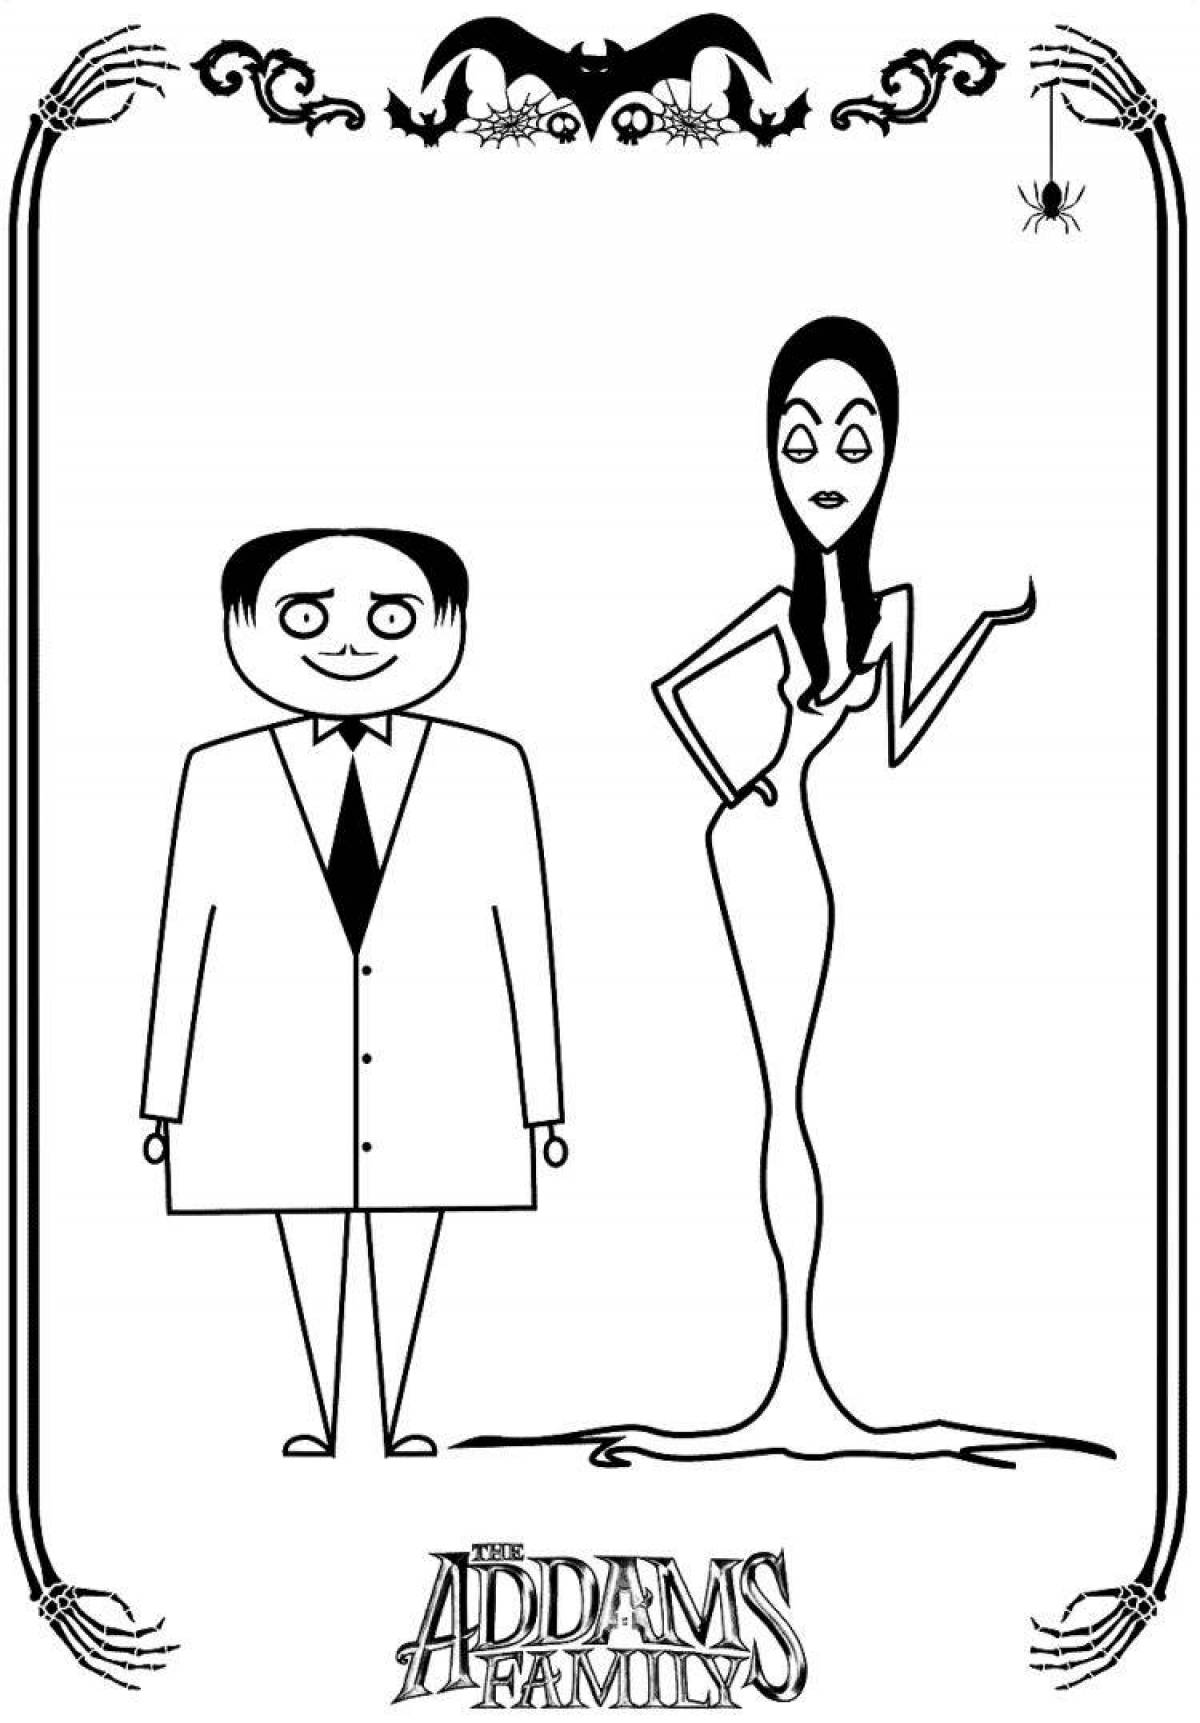 Coloring Addams Family coloring pages for kids